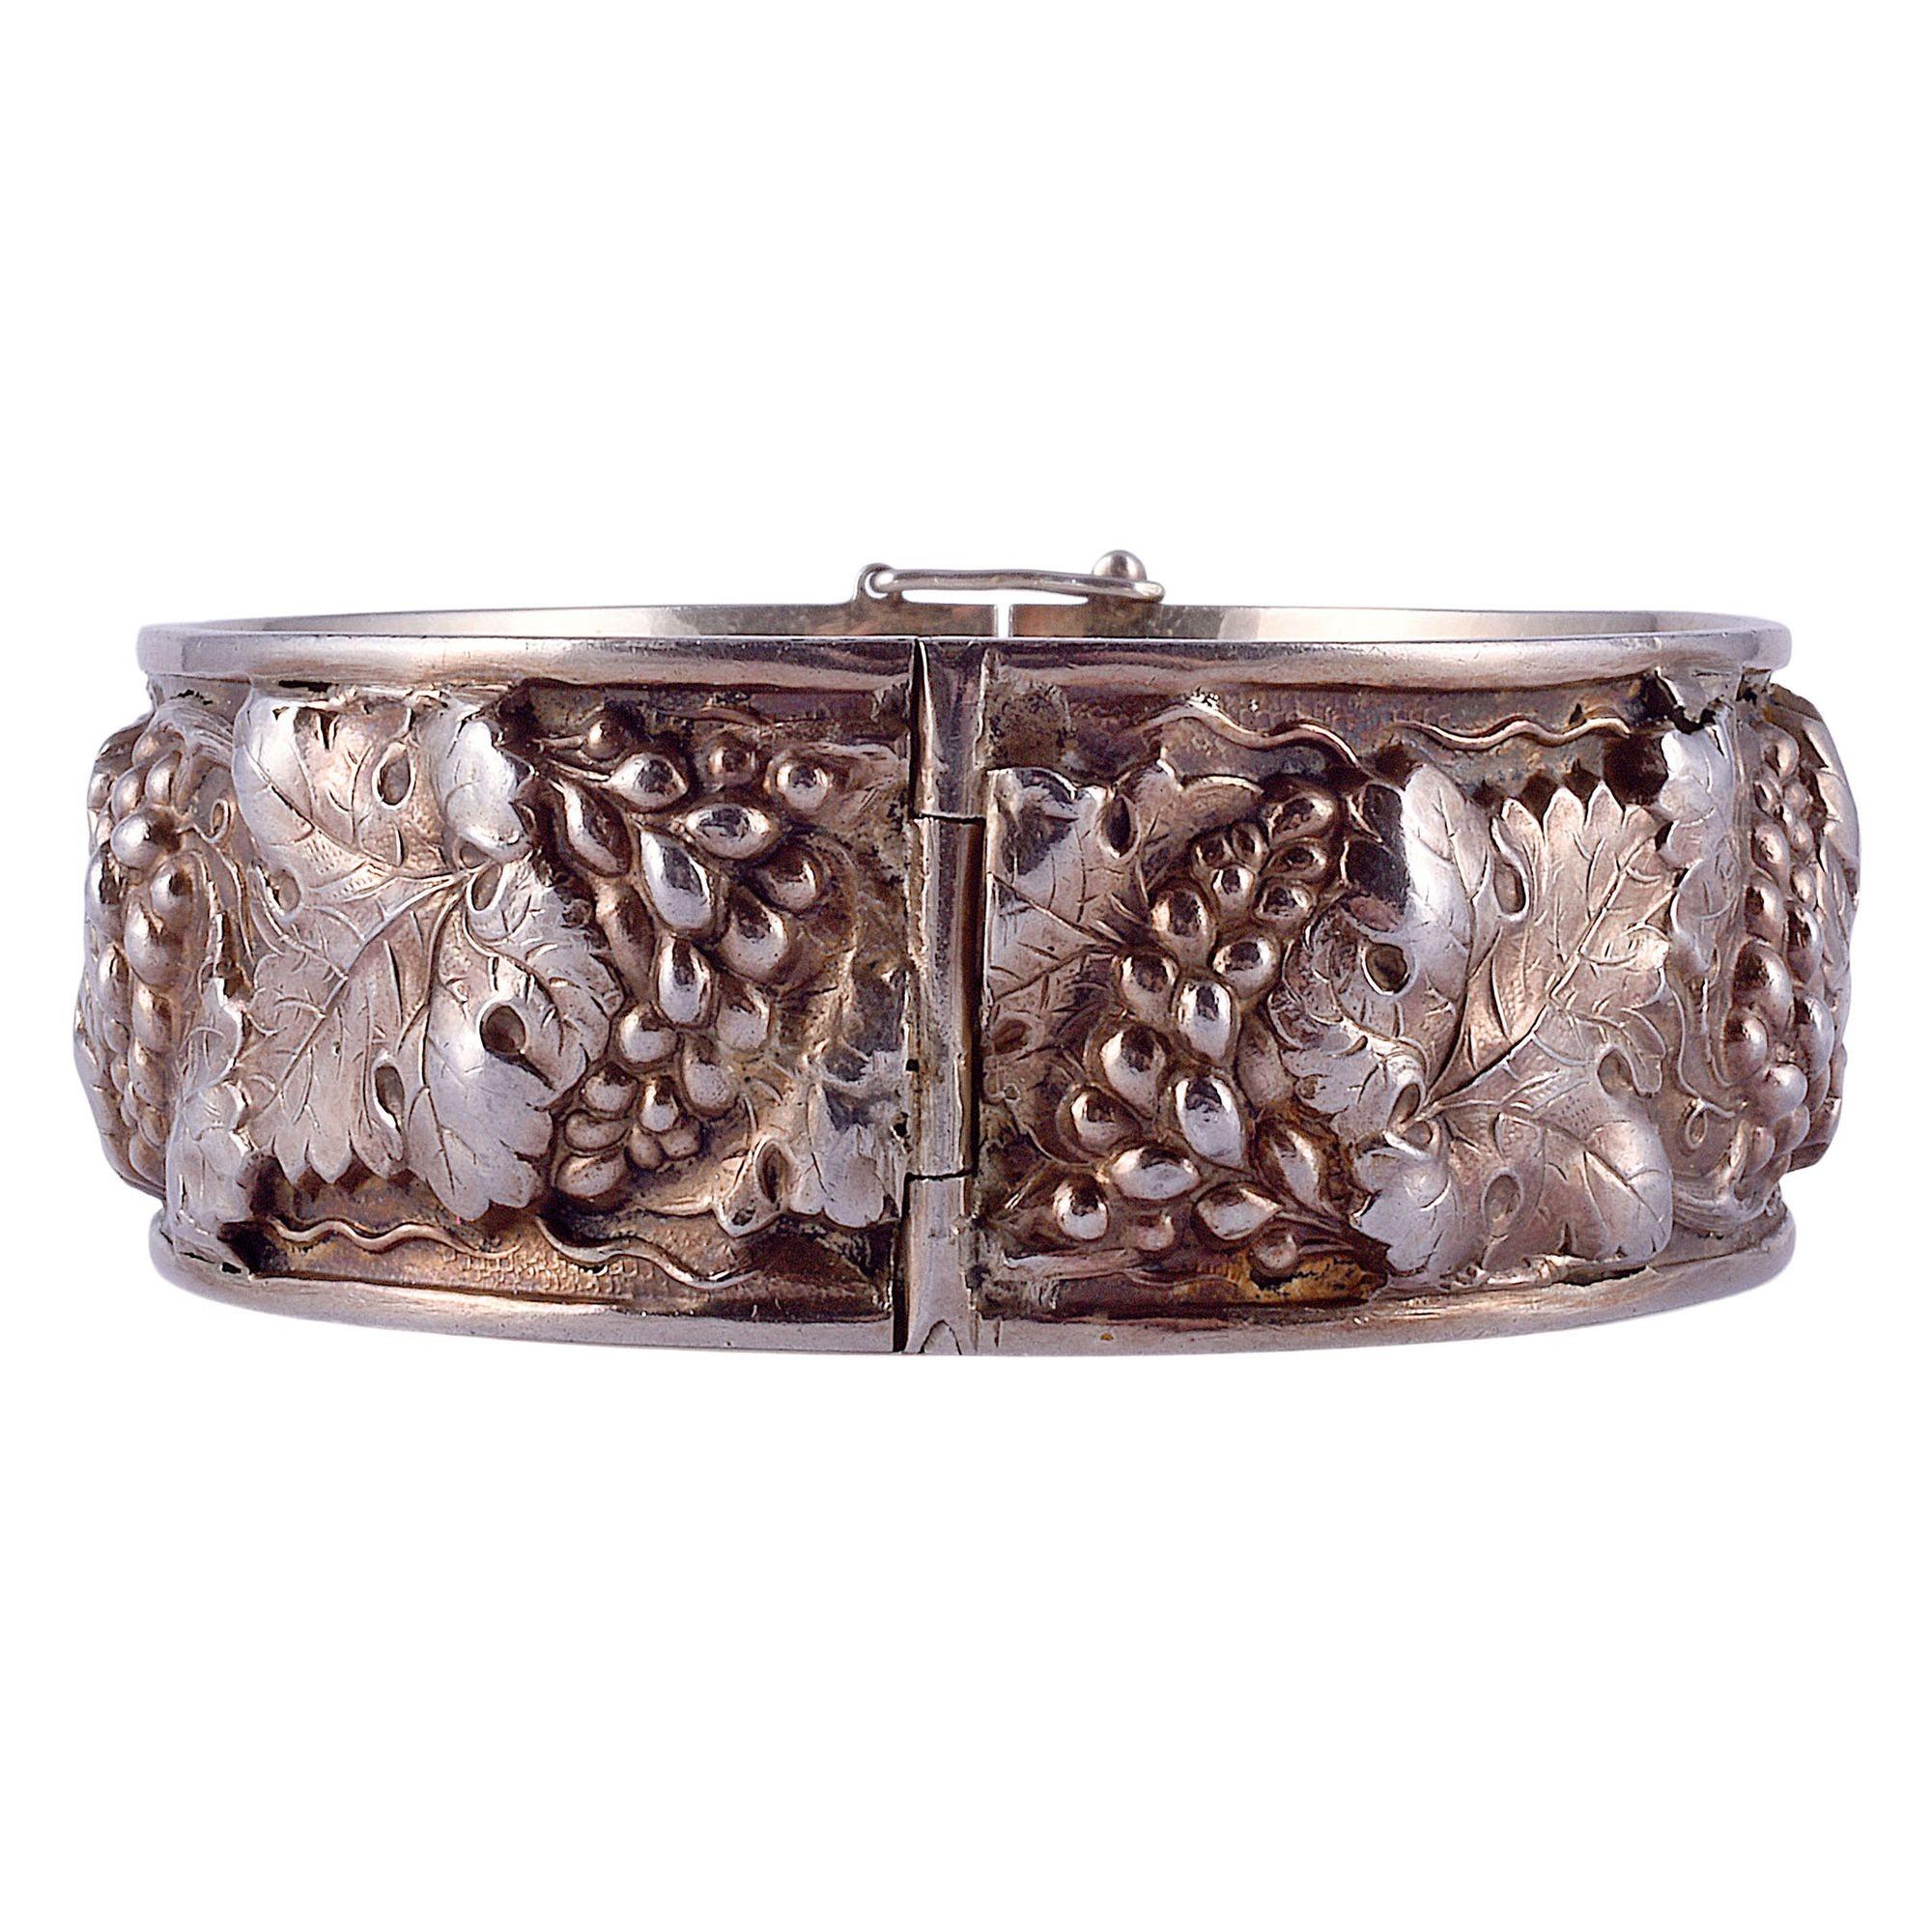 Early 21st Century Grape Vine Motif Sterling Silver Hinged Bangle Bracelet In Good Condition For Sale In Solvang, CA